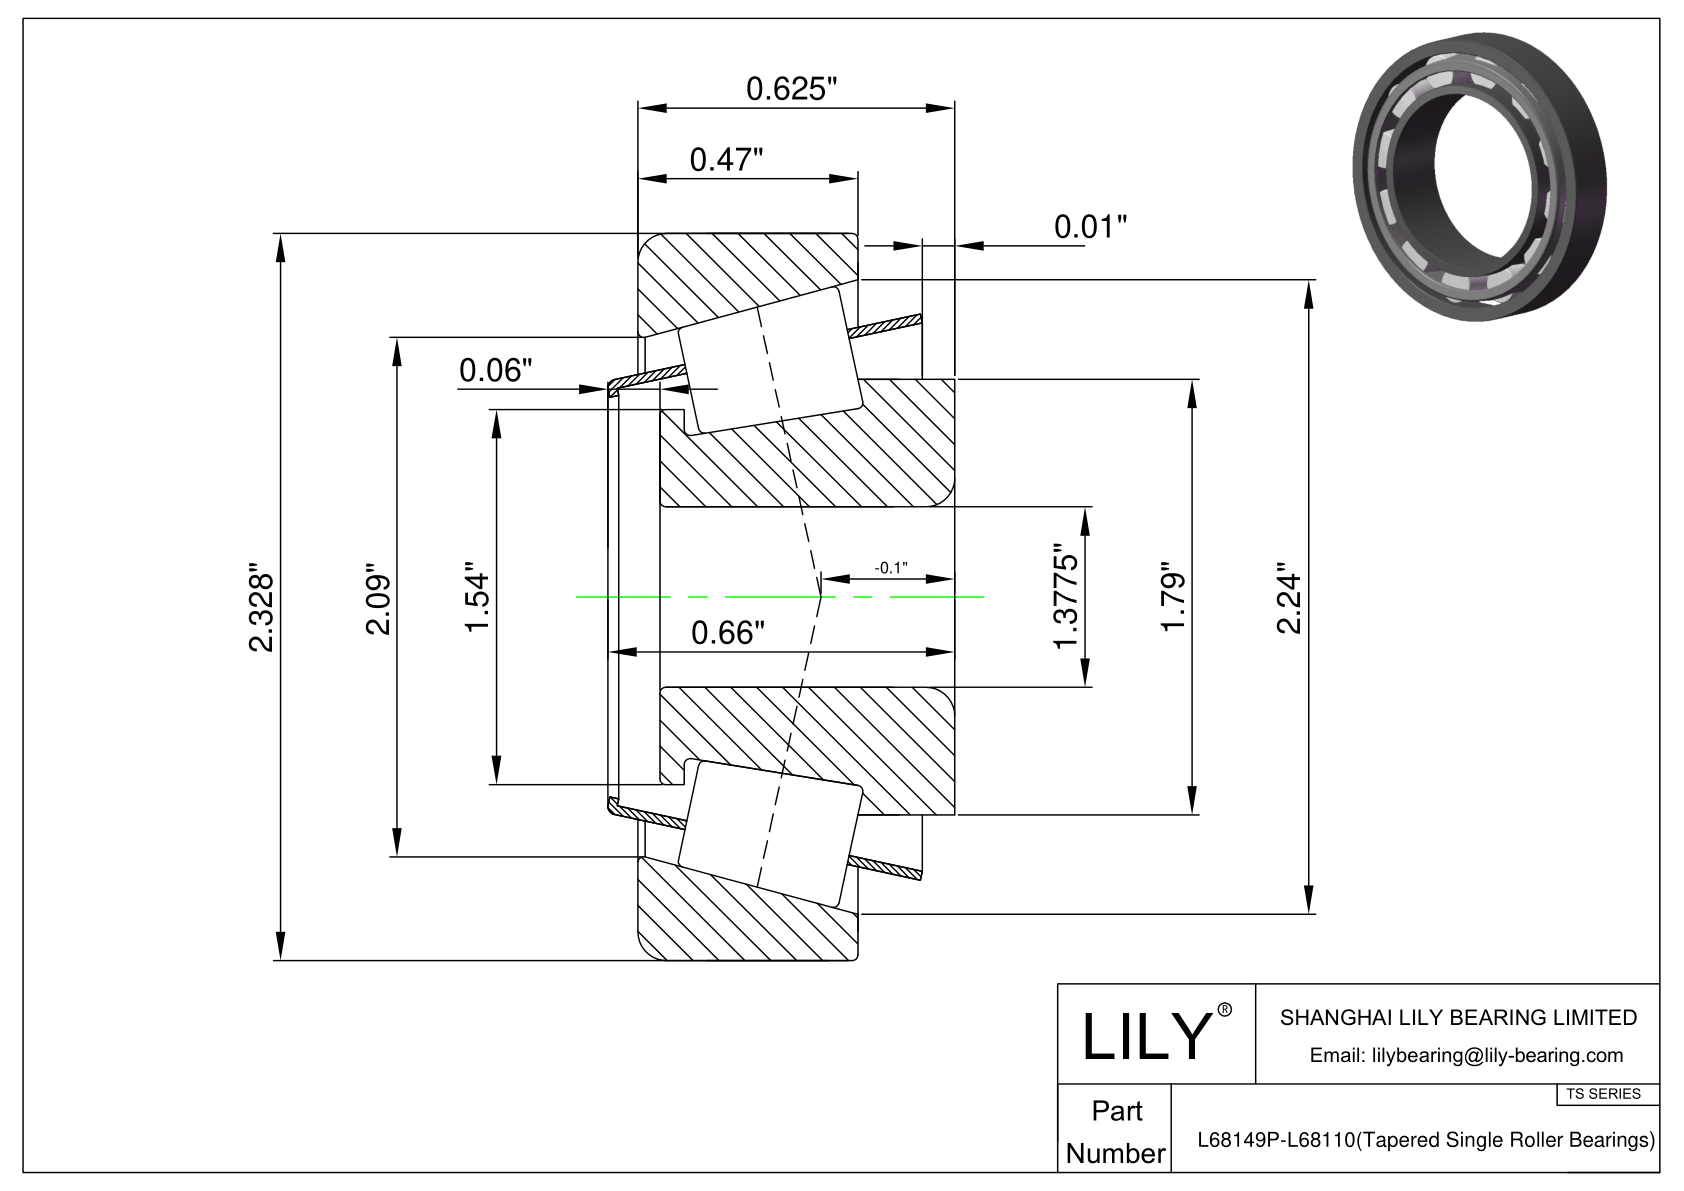 L68149P-L68110 TS (Tapered Single Roller Bearings) (Imperial) cad drawing